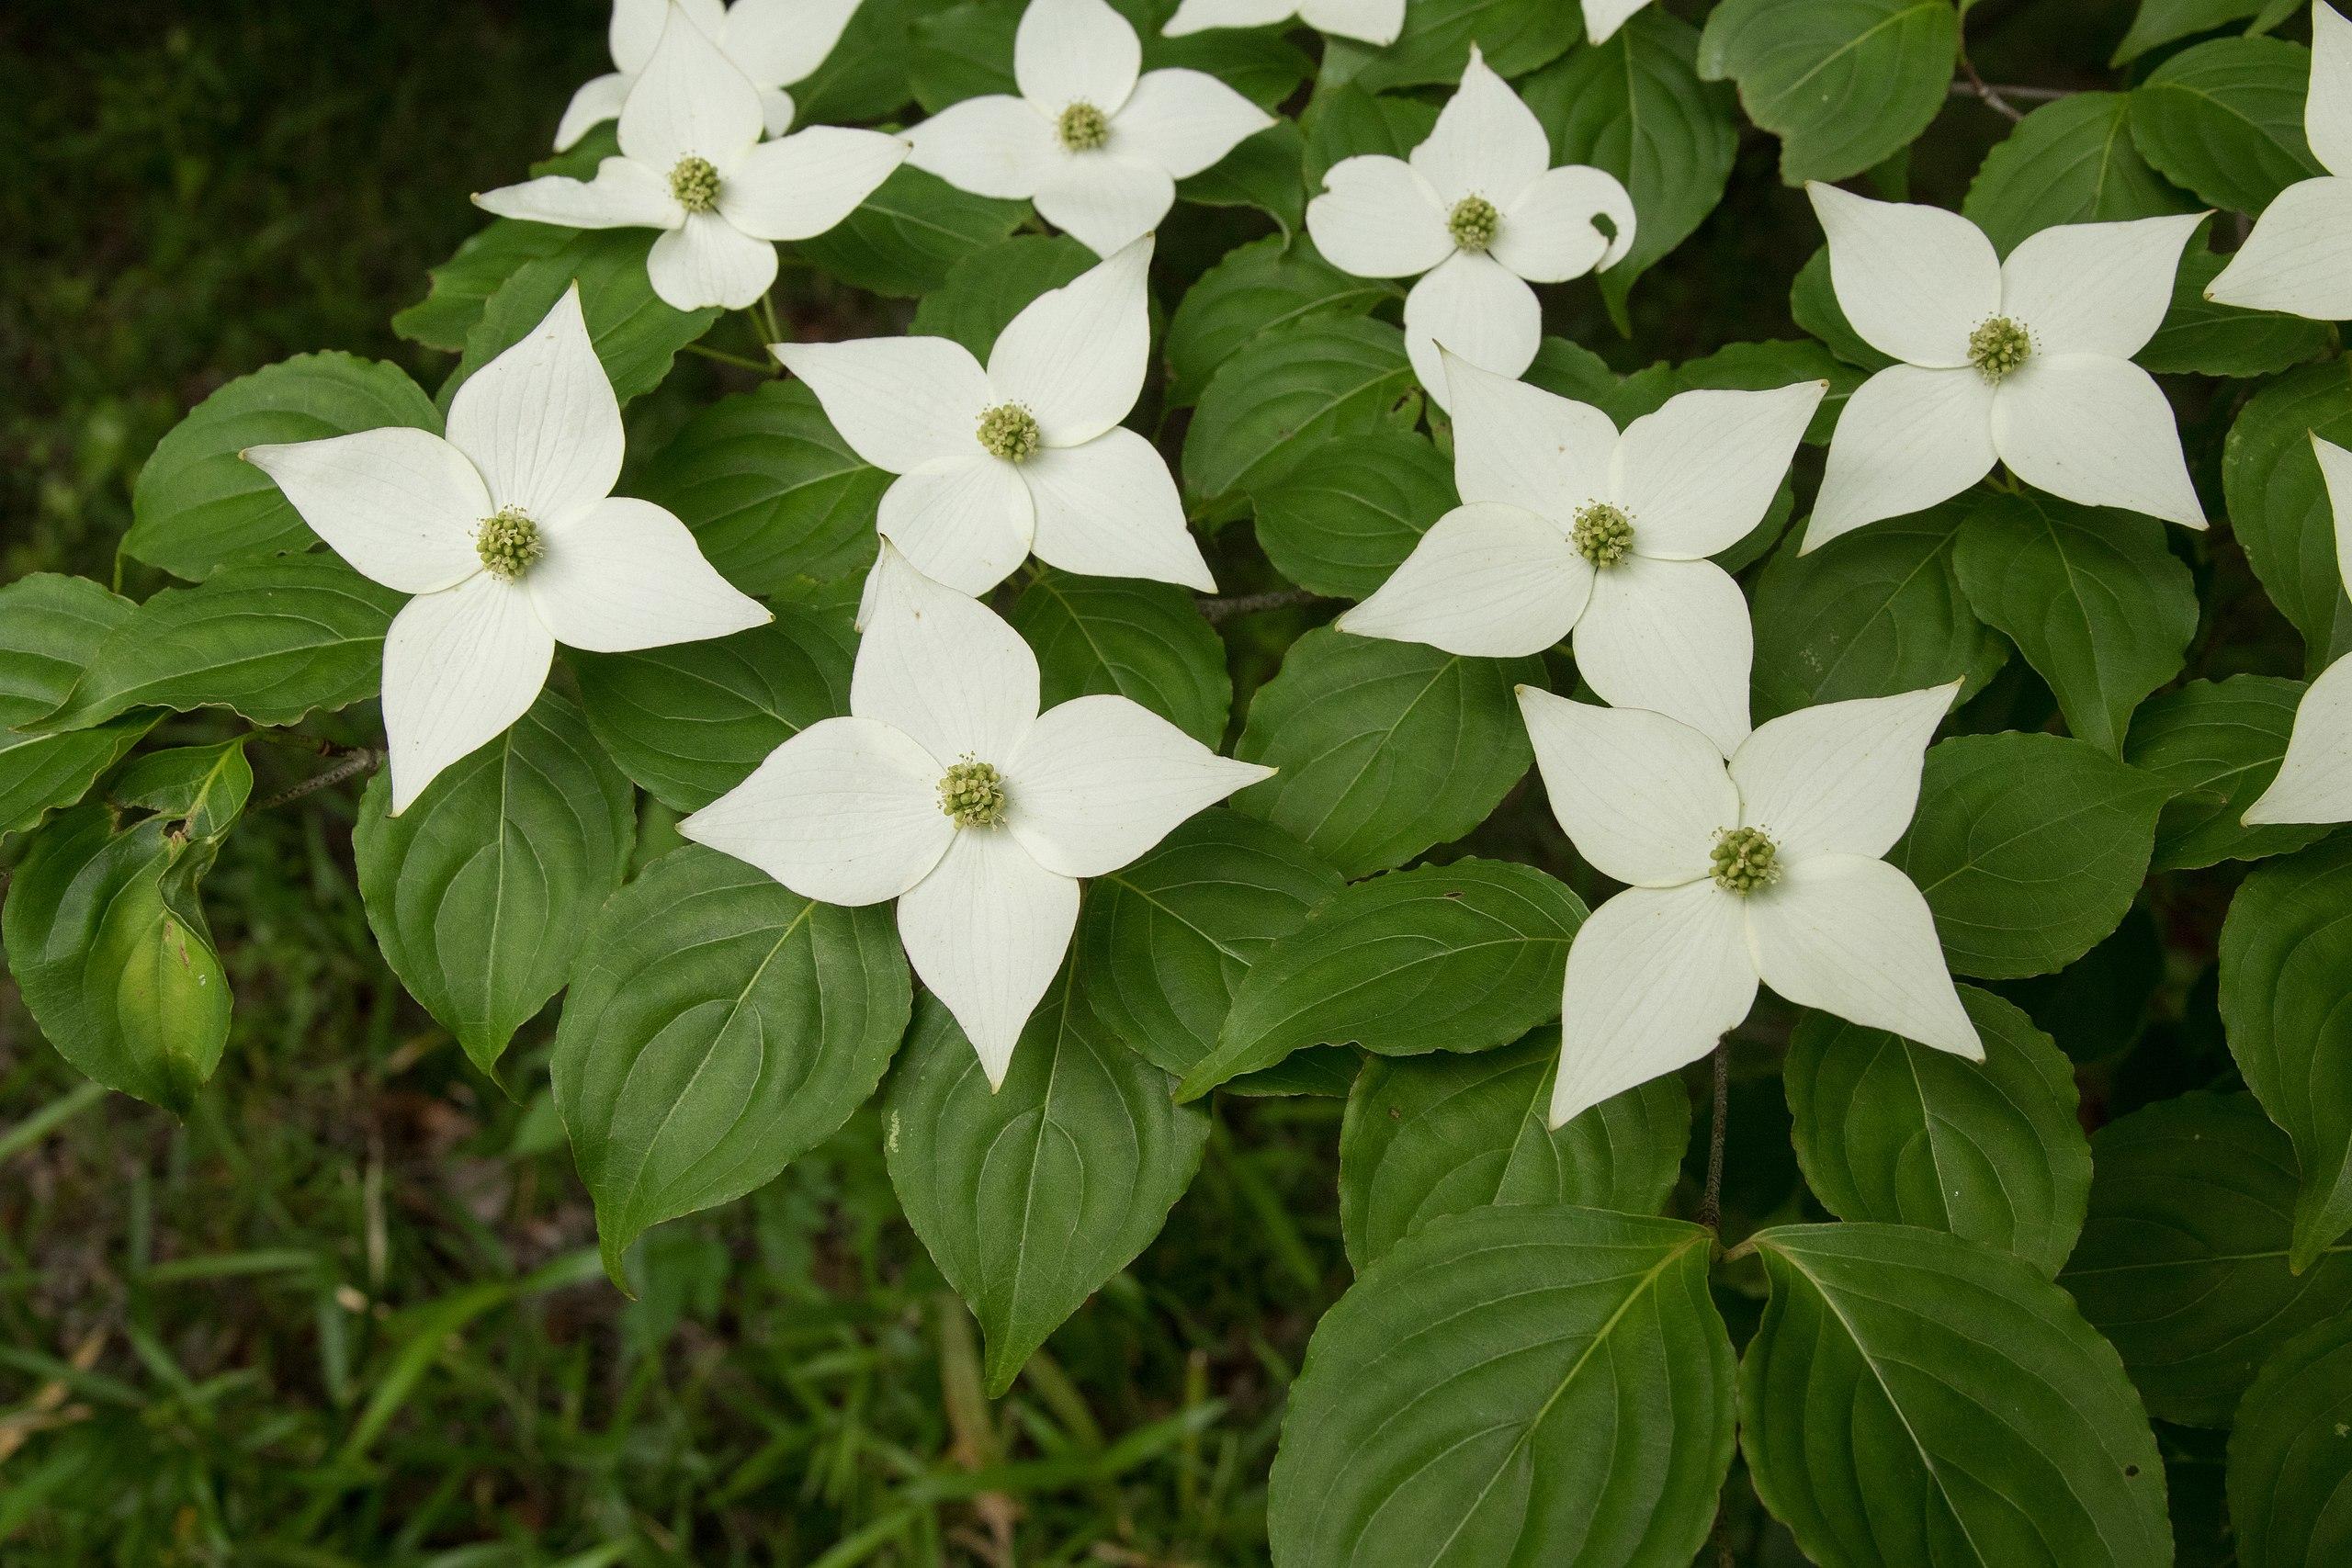 white flowers with green-yellow center, green leaves and stems
